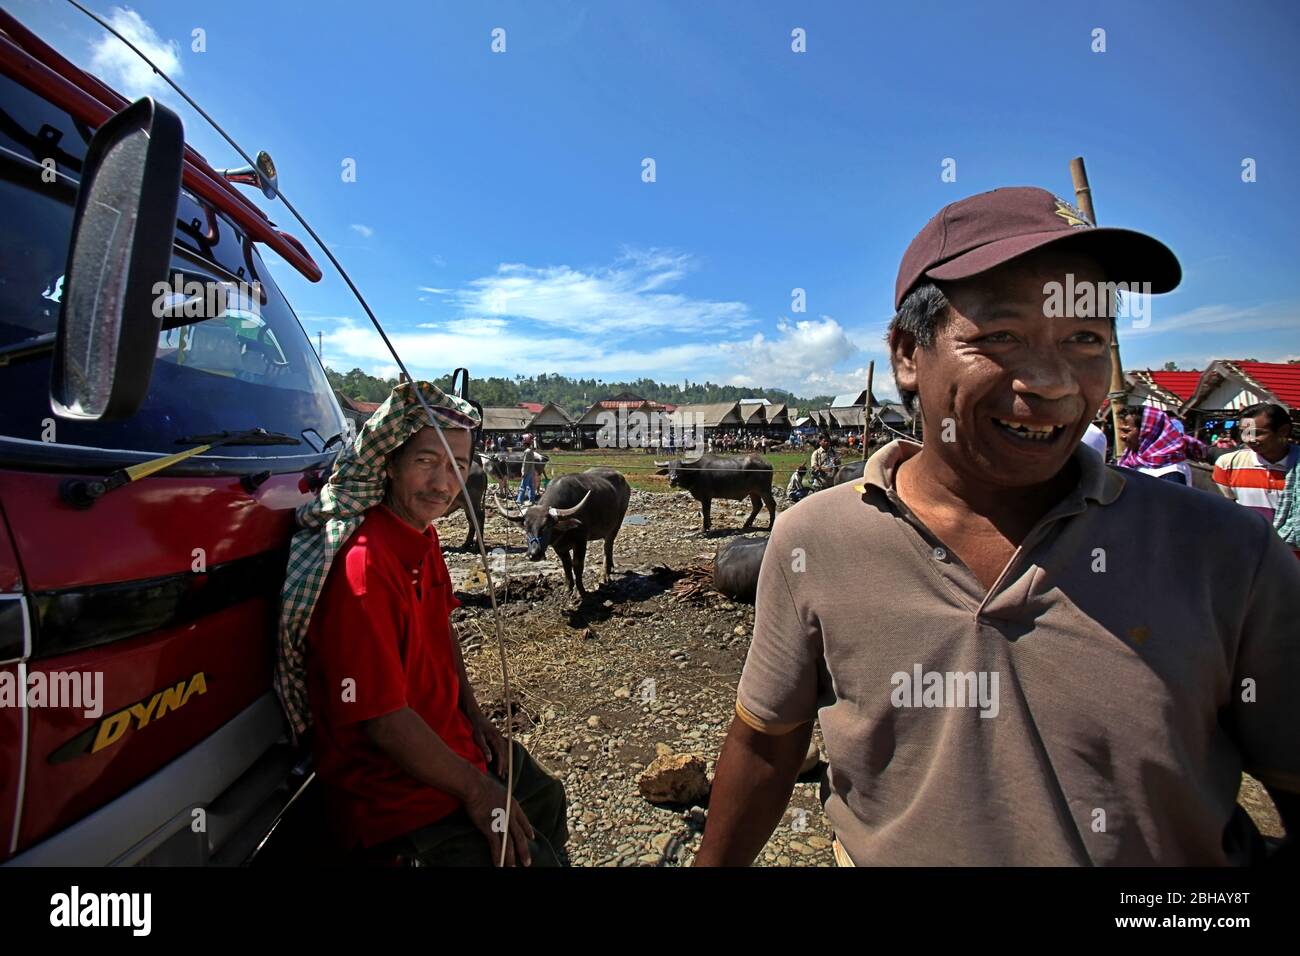 Water buffalo traders at traditional livestock market in Rantepao, North Toraja, South Sulawesi, Indonesia. Stock Photo